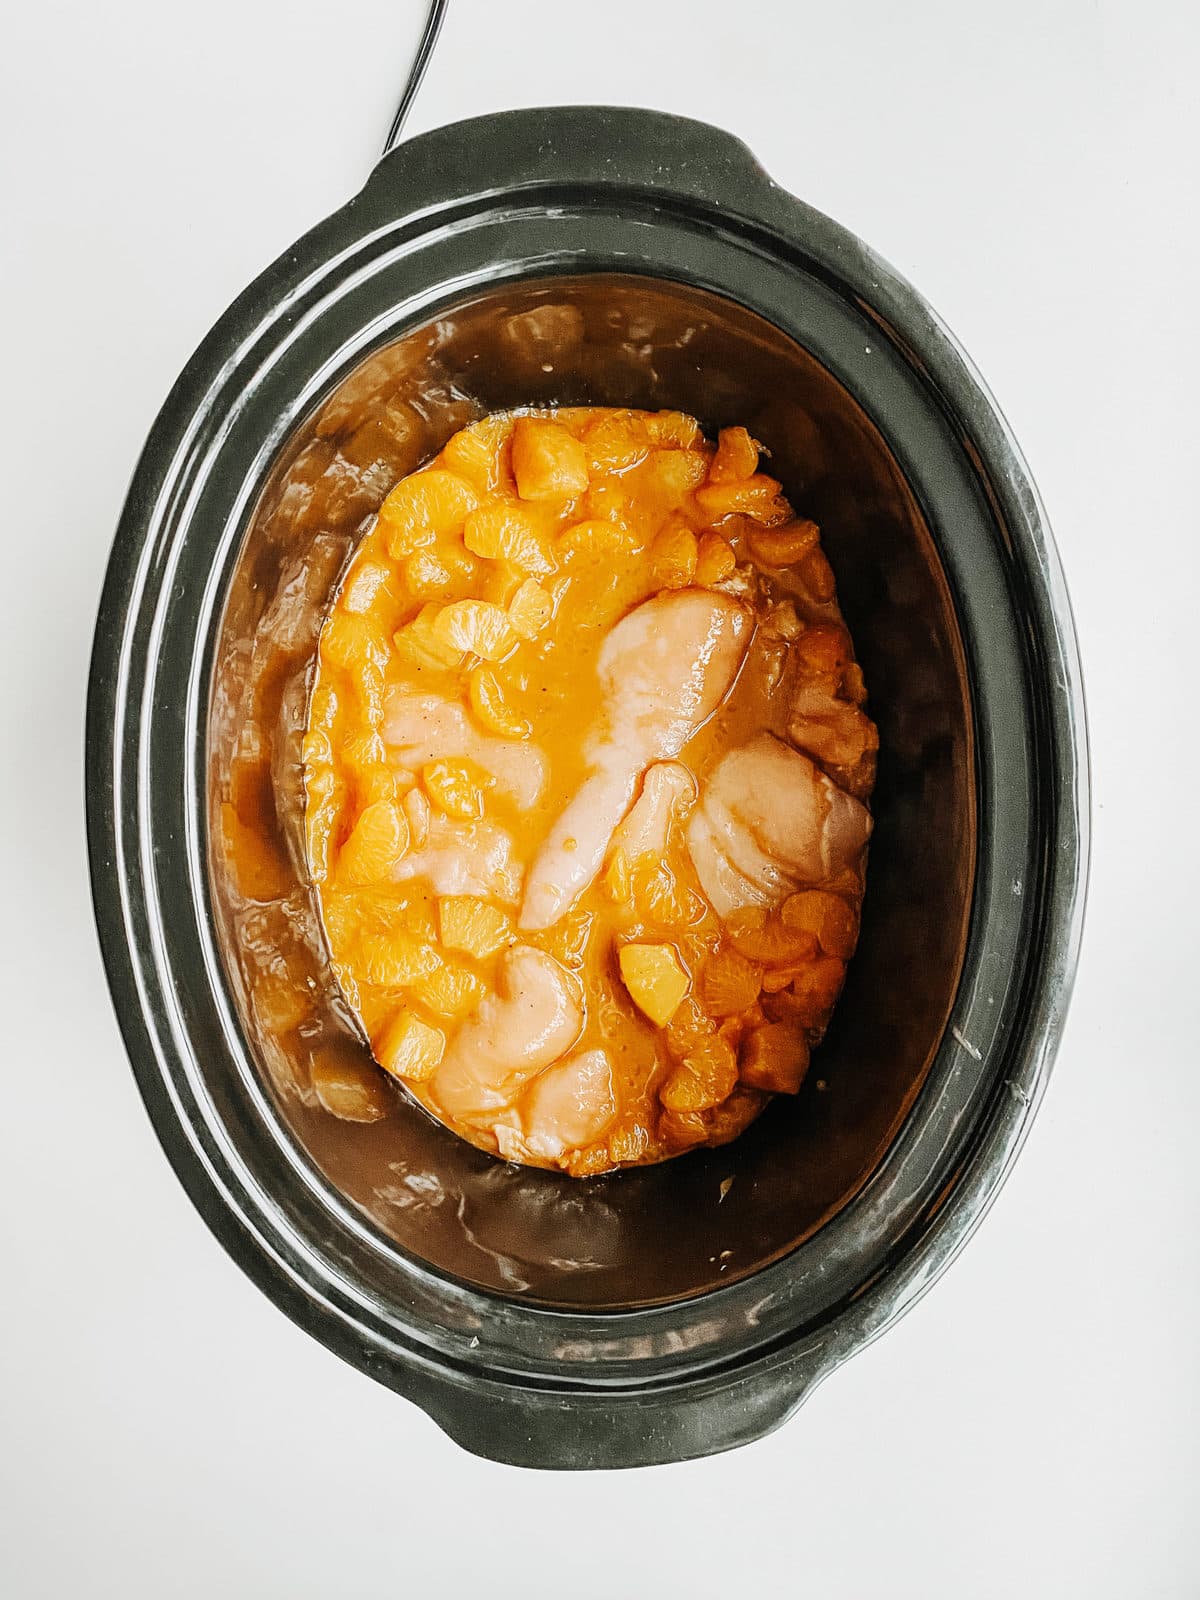 pineapple orange chicken ingredients all poured into slow cooker